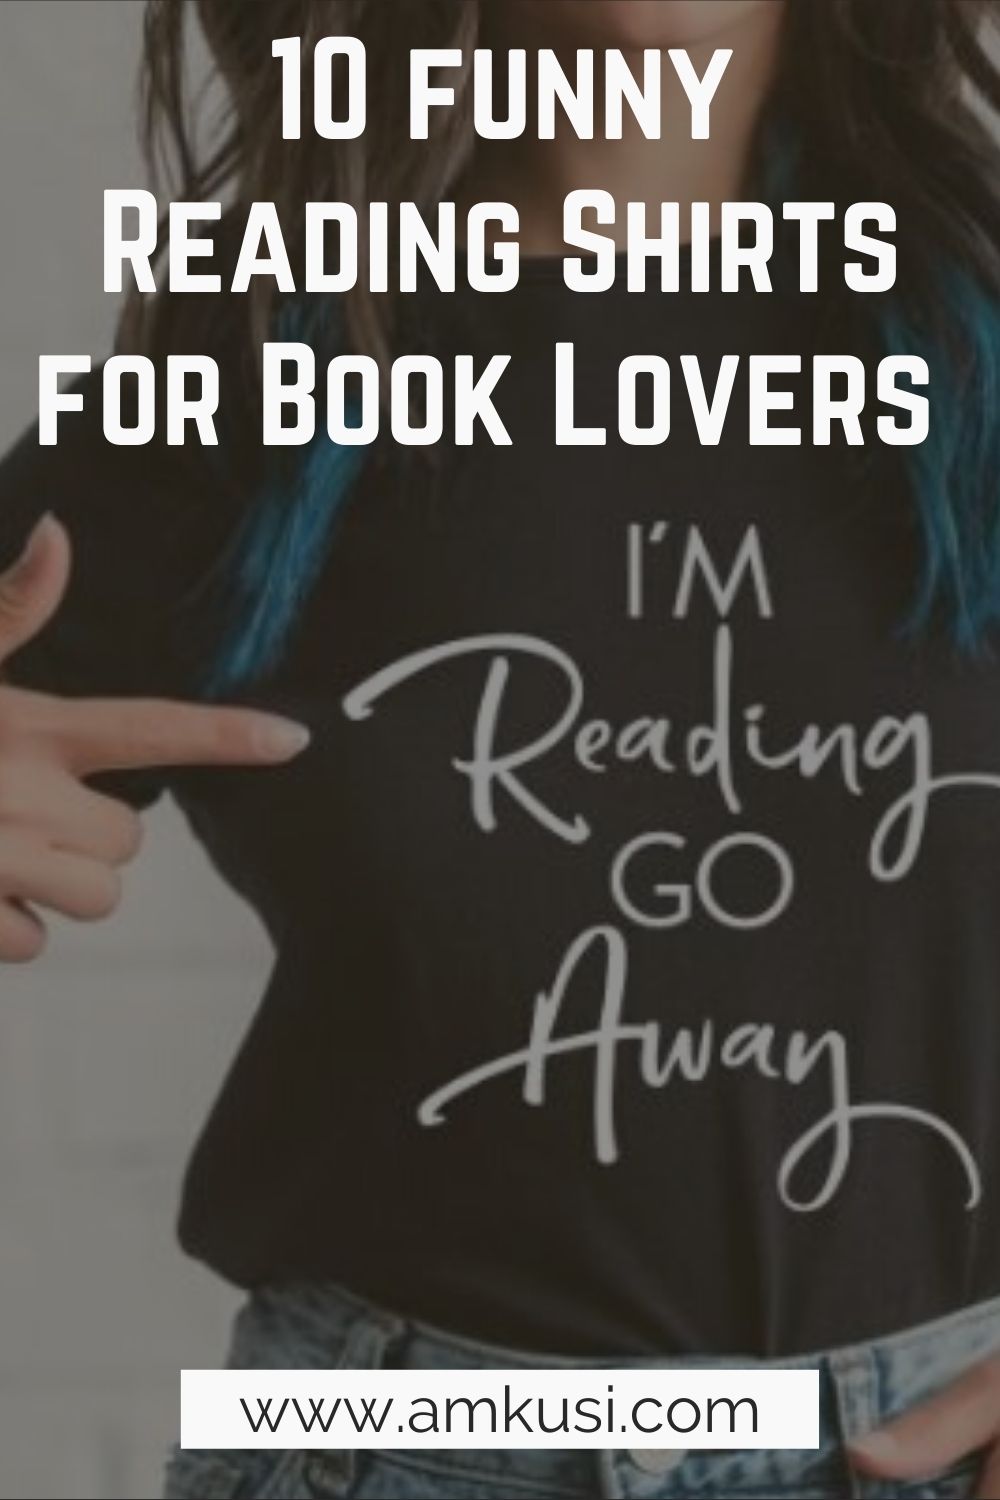 10 Funny Reading Shirts for Book Lovers (Hoodies and V-Necks Included)